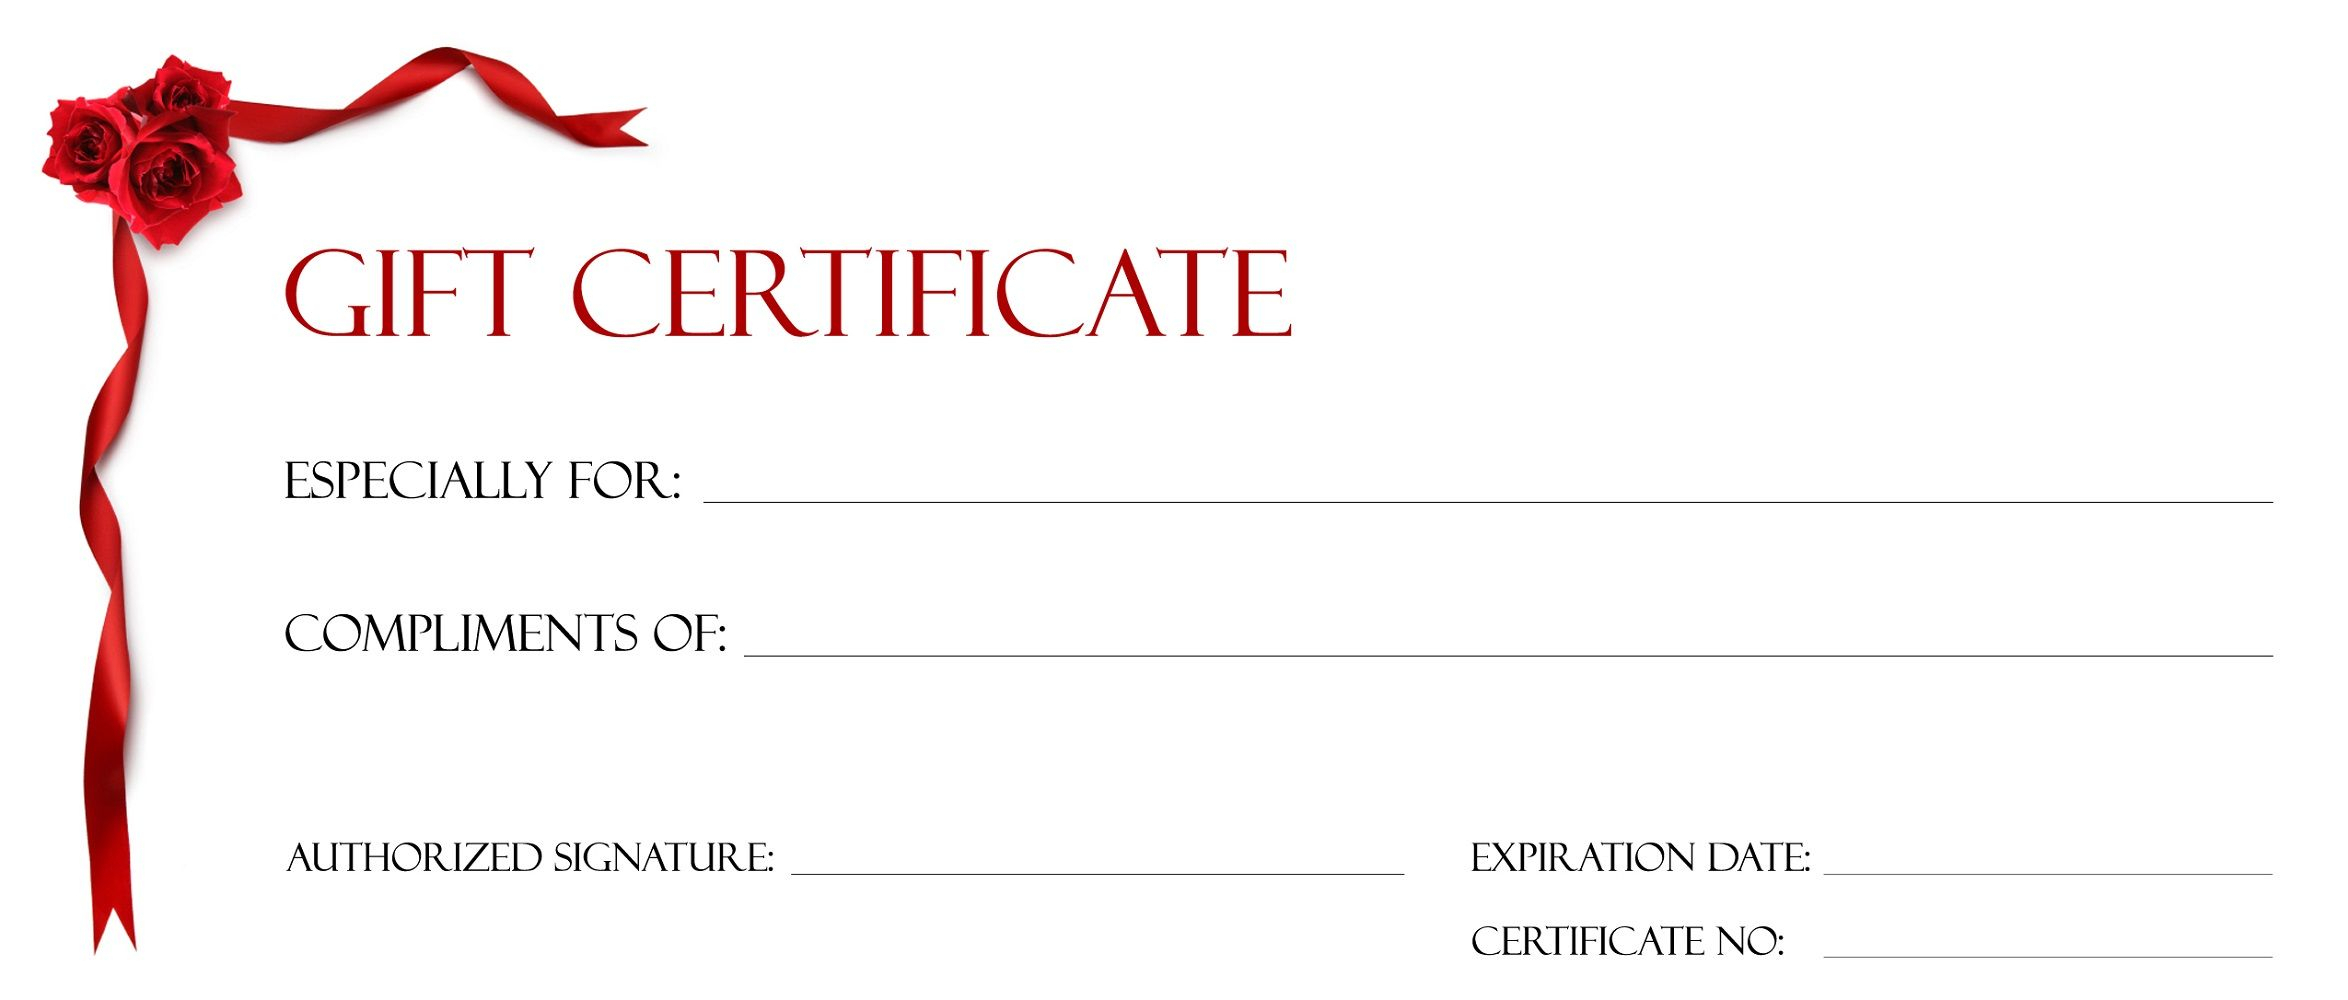 Gift Certificate Templates To Print | Gift Certificate Inside Publisher Gift Certificate Template